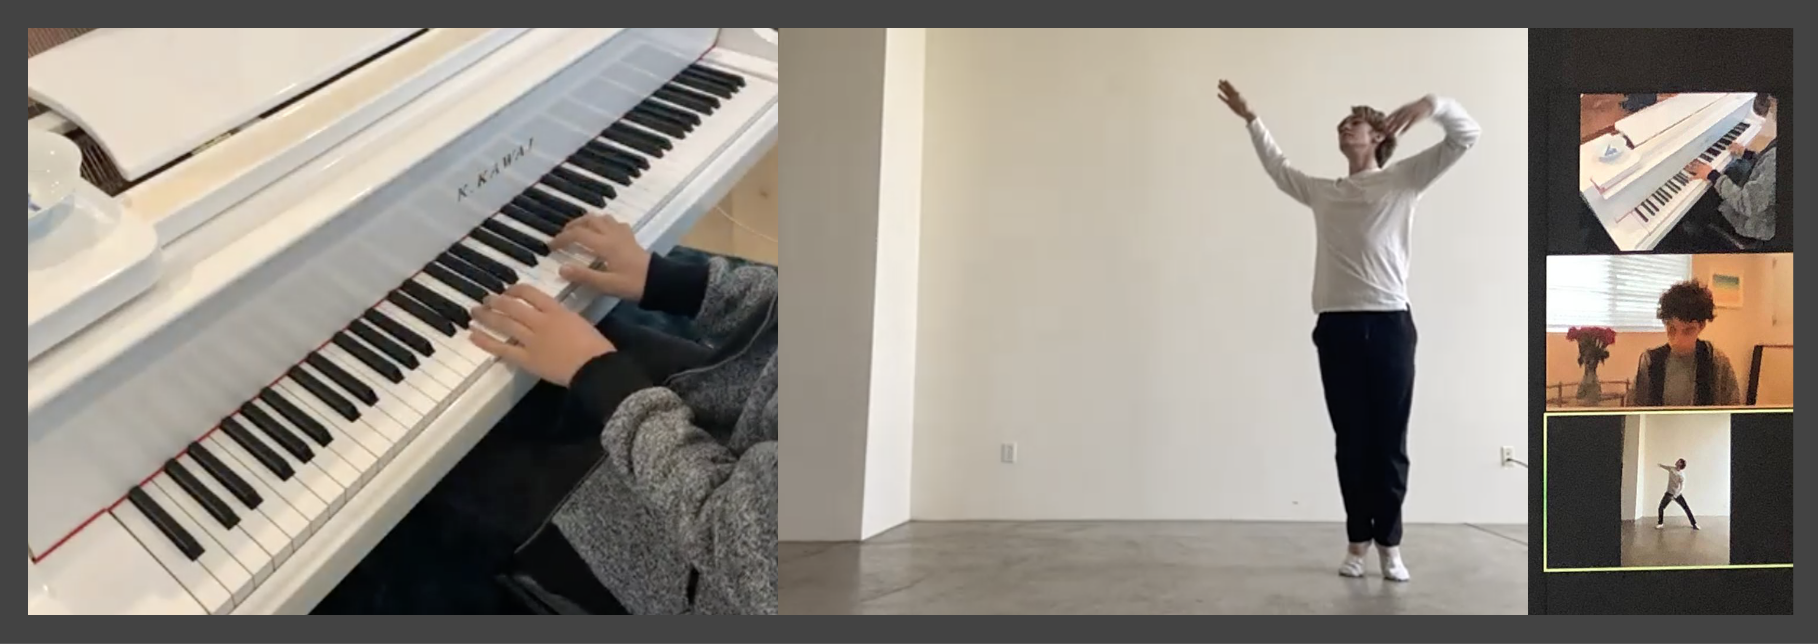 Zoom screenshot of person dancing and hands playing a piano